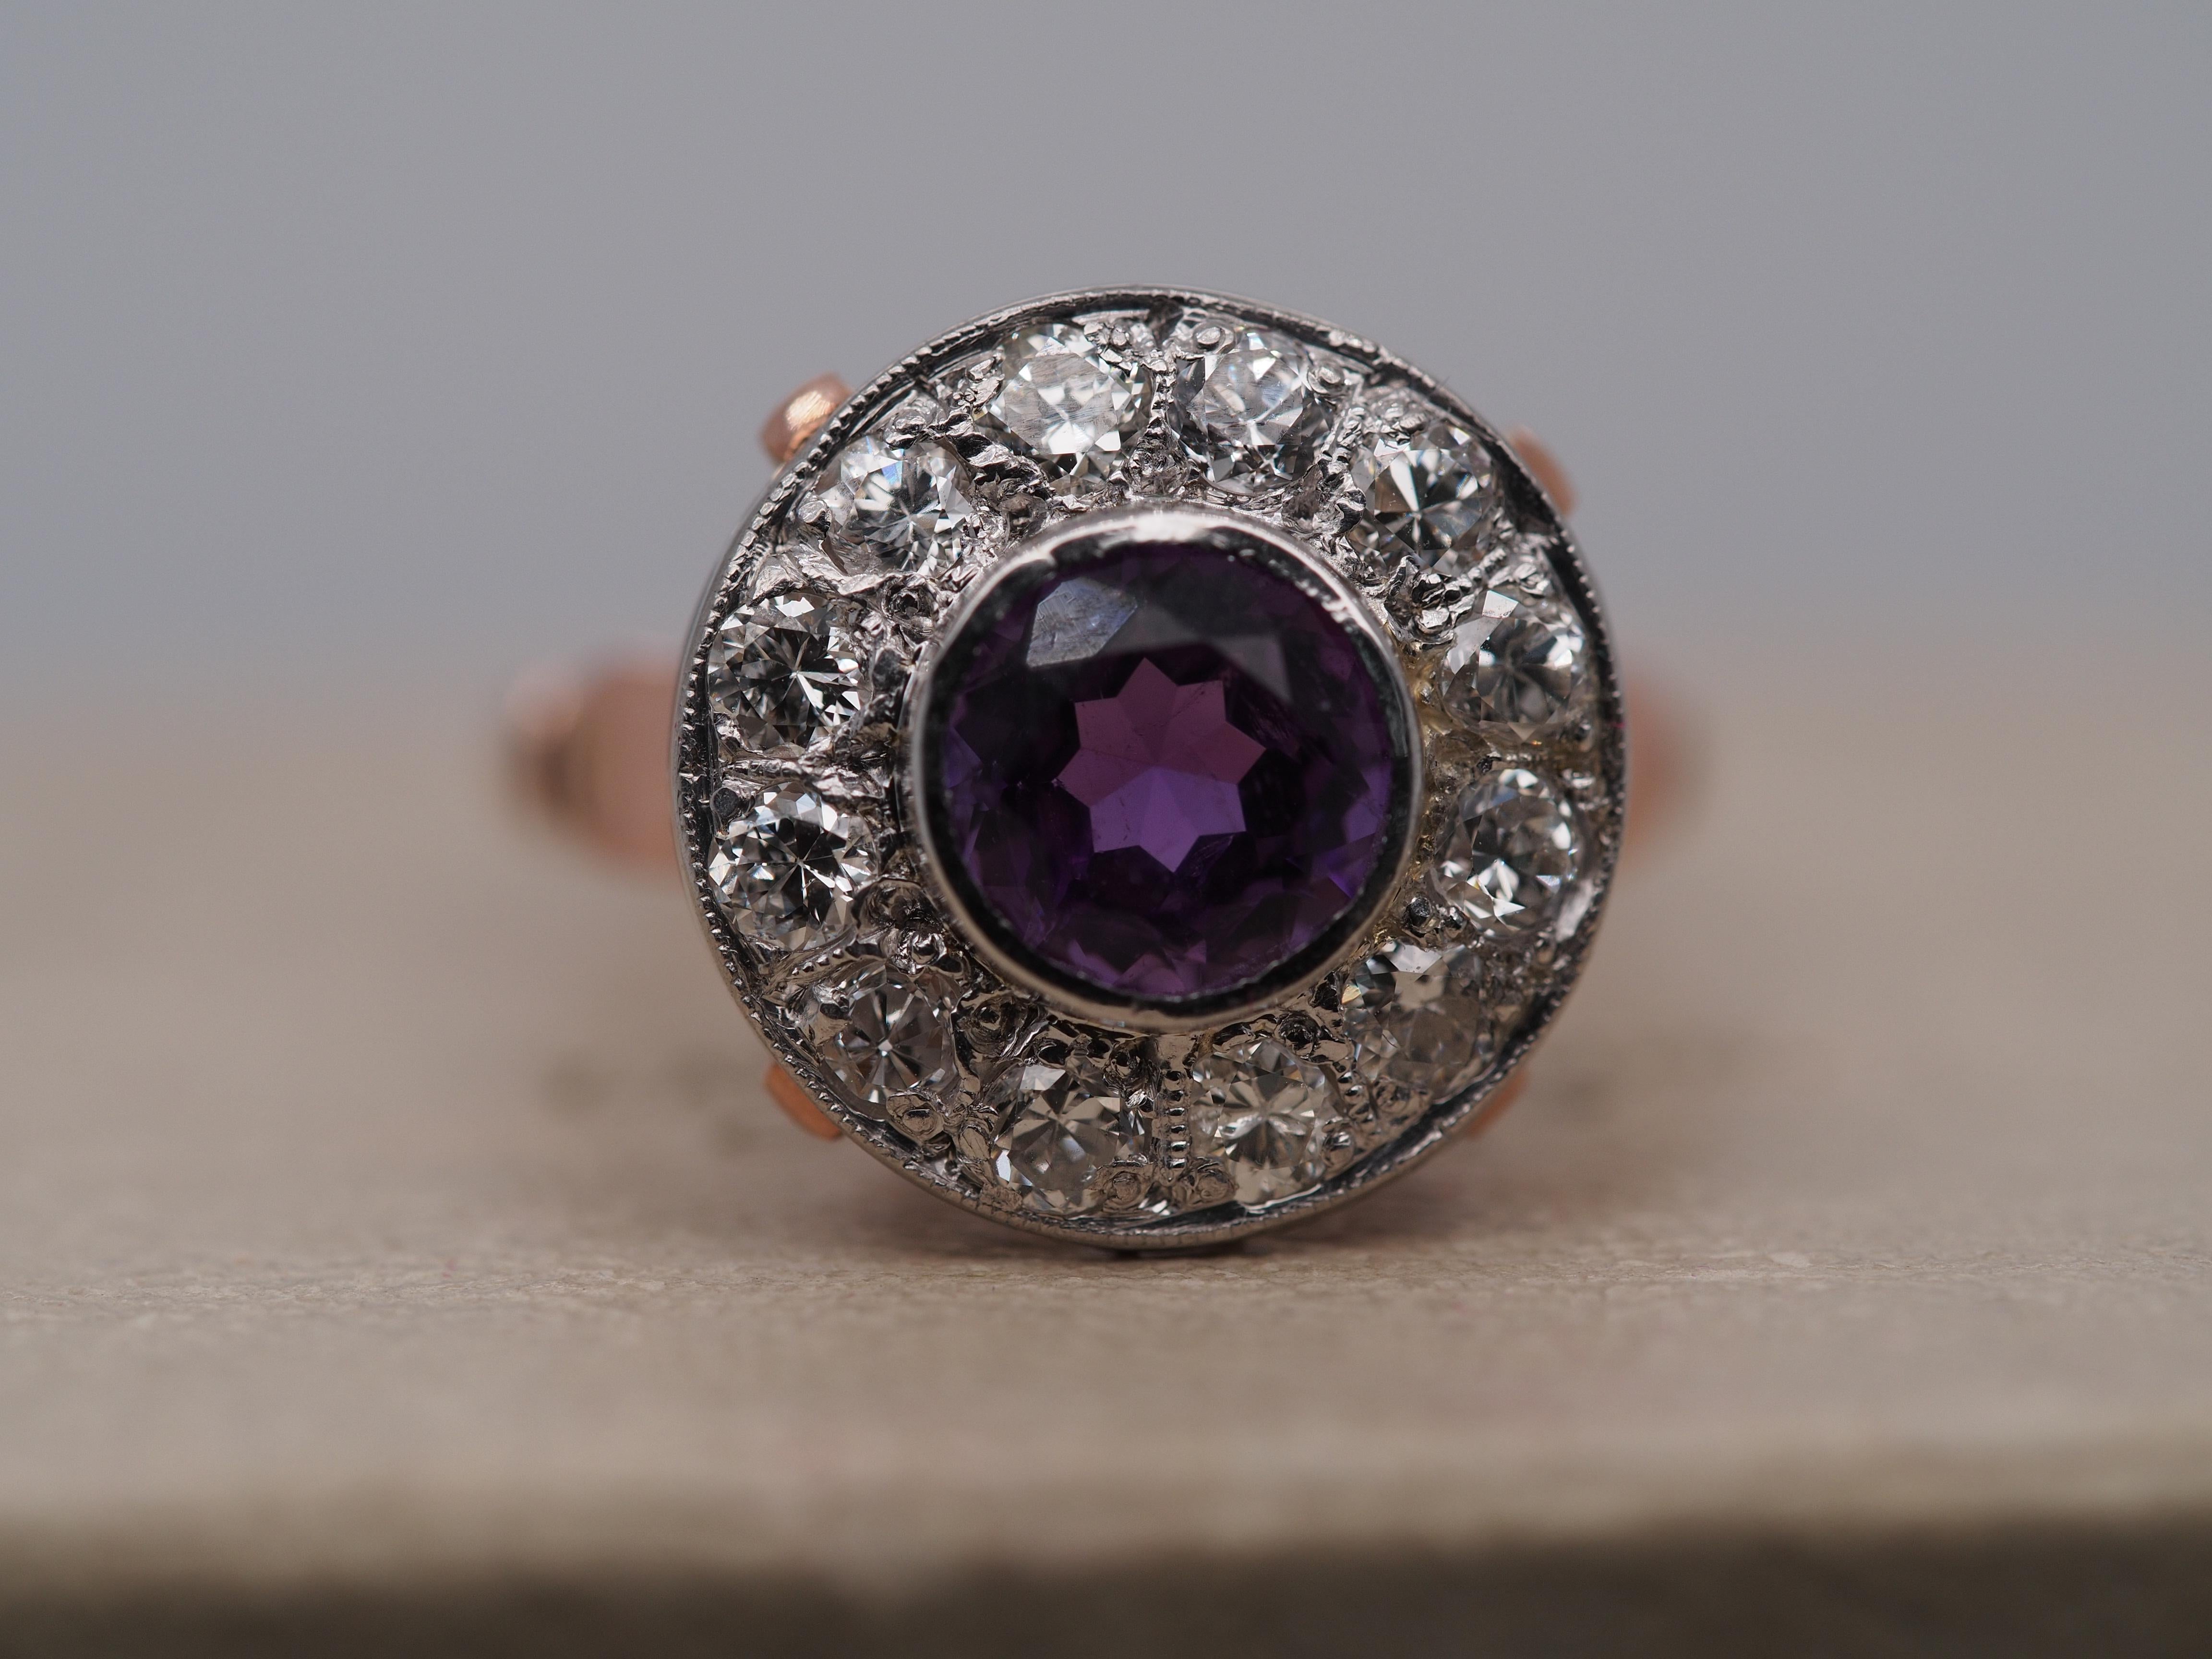 Item Details:
Ring Size: 7
Metal Type: 14k Rose Gold [Hallmarked, and Tested]
Weight: 4.8 grams
Diamond Details: Old European Cut, Natural, G Color, VS Clarity, .75ct total weight.
Amethyst: 1.00ct, Natural, Round
Band Width: 2.4mm
Condition: